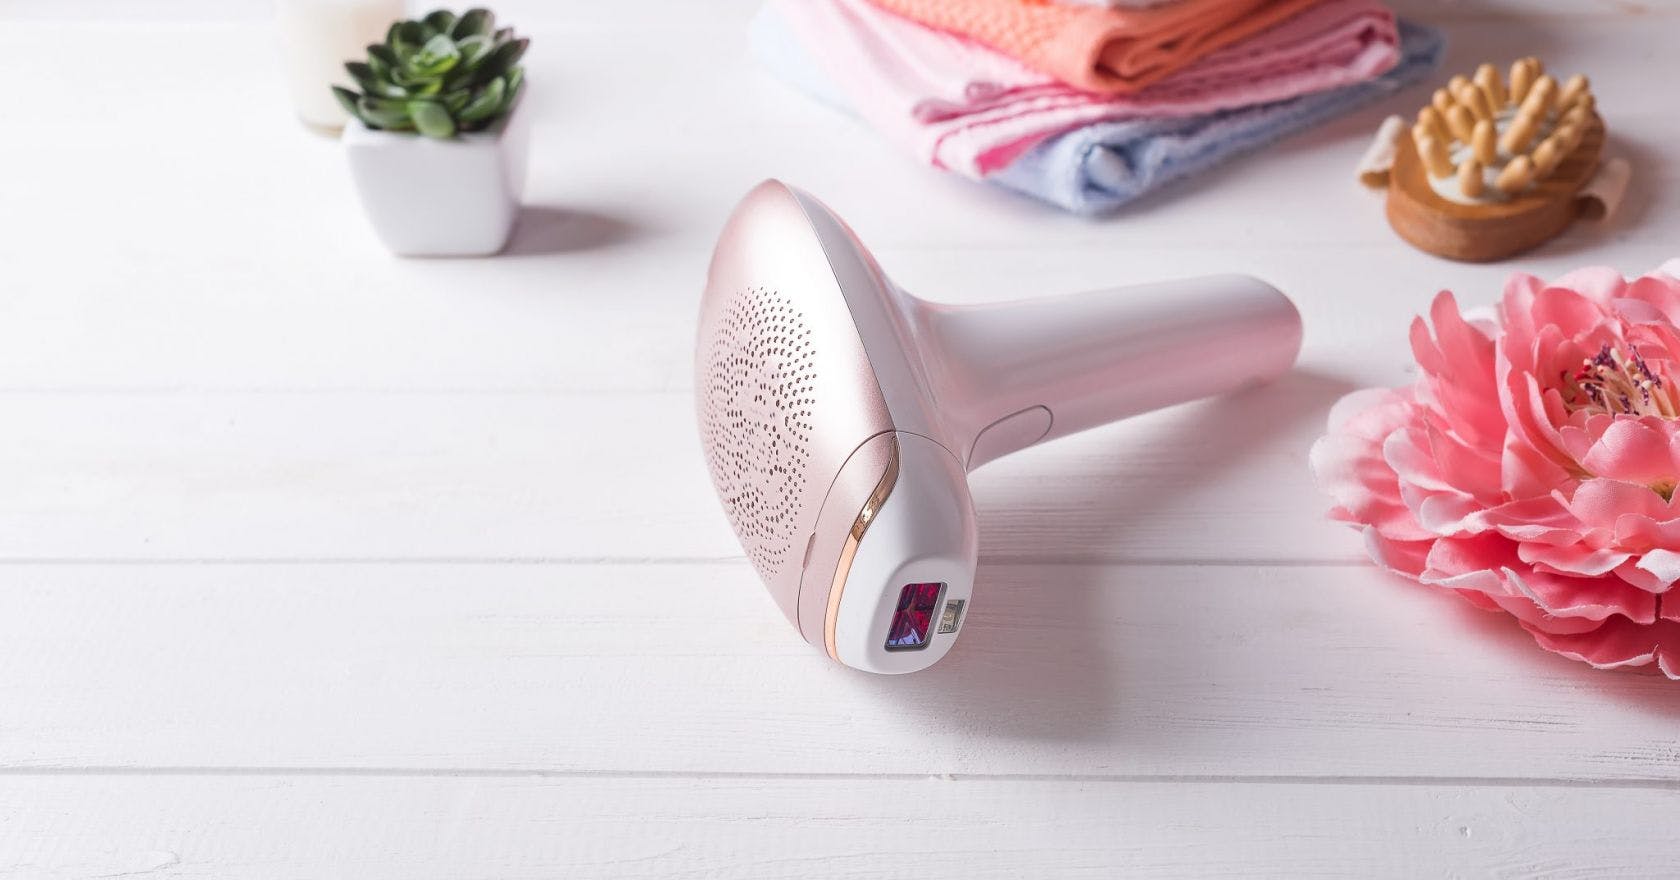 At home hair removal: how to use an IPL device